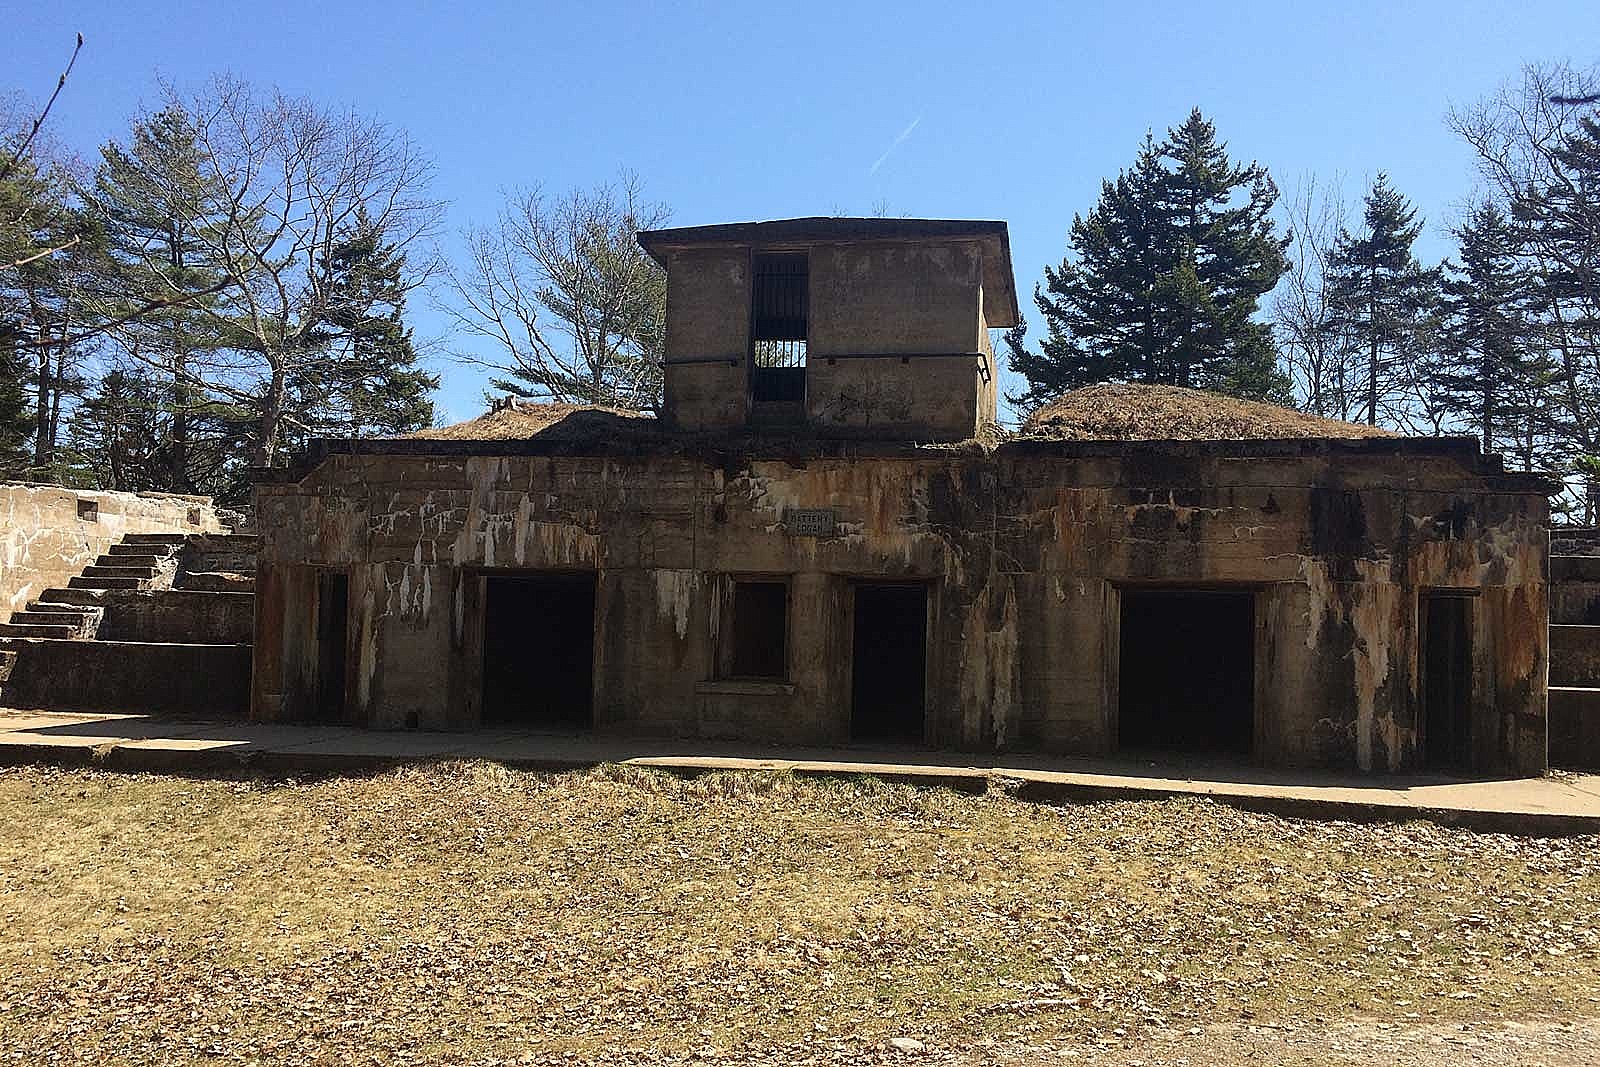 Explore This Abandoned Oceanside Military Fortress in Maine